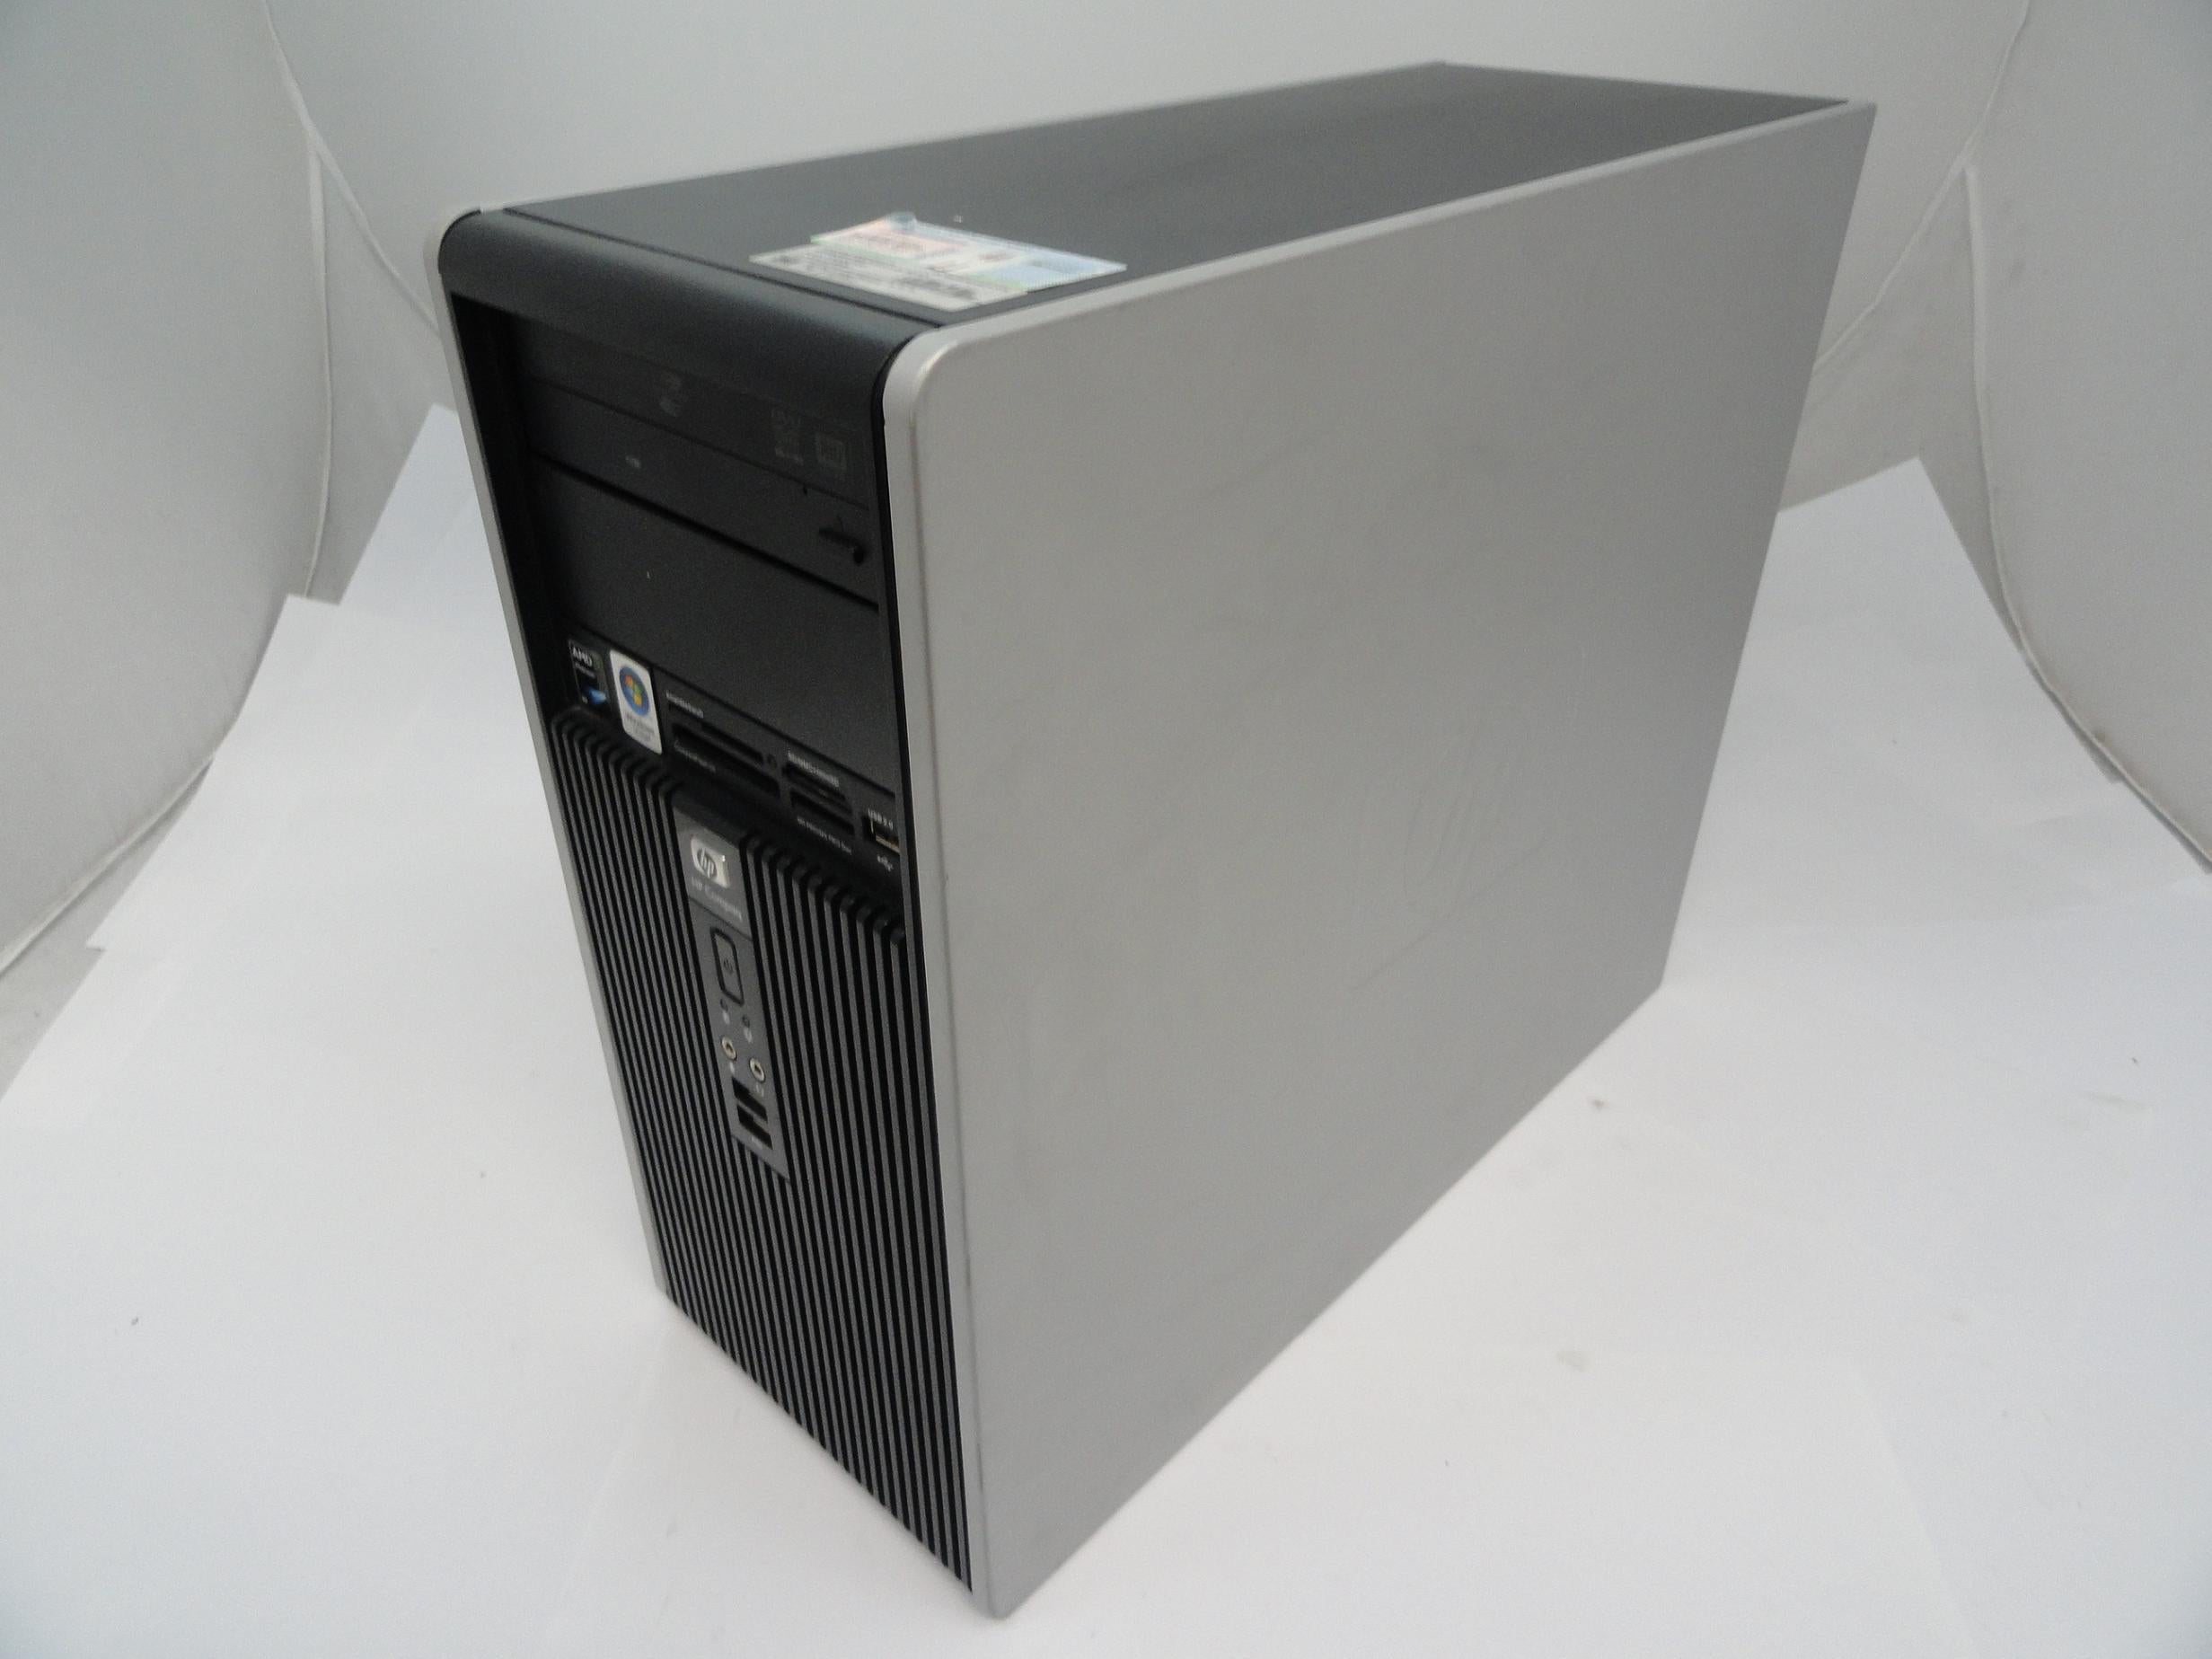 KK377ET#ABU - HP DC5800 Microtower Computer. 3GHz Core2 Duo CPU 2Gb Installed RAM. No HDD. DVD ReWriter - USED